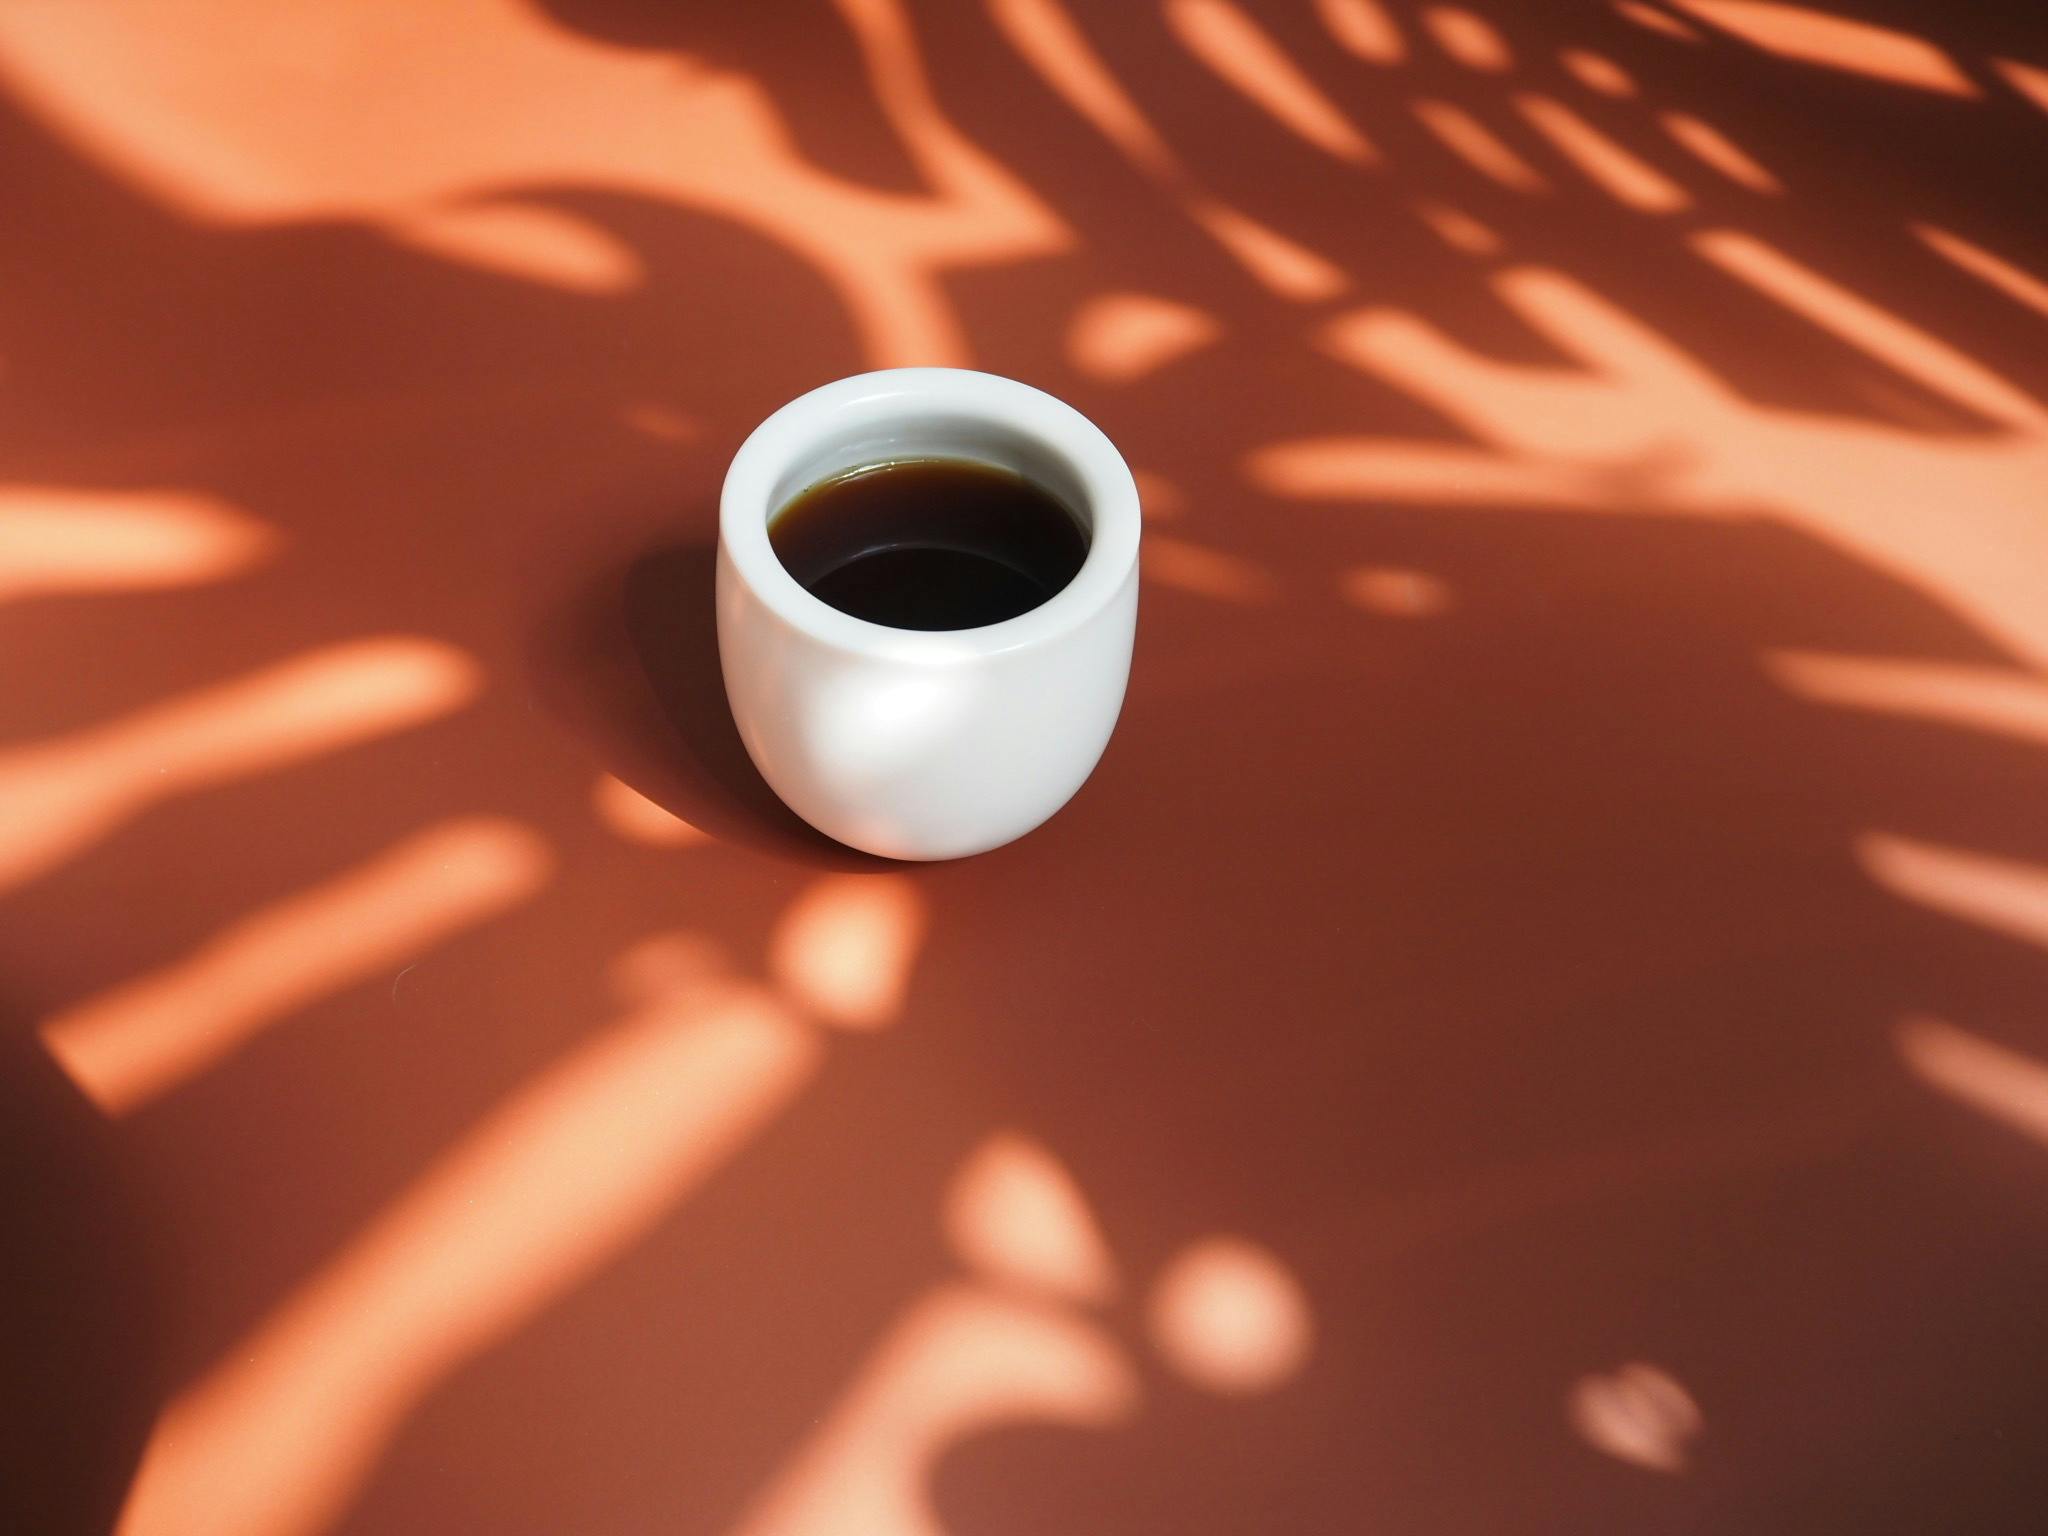 A cup of coffee in the shadows of plants